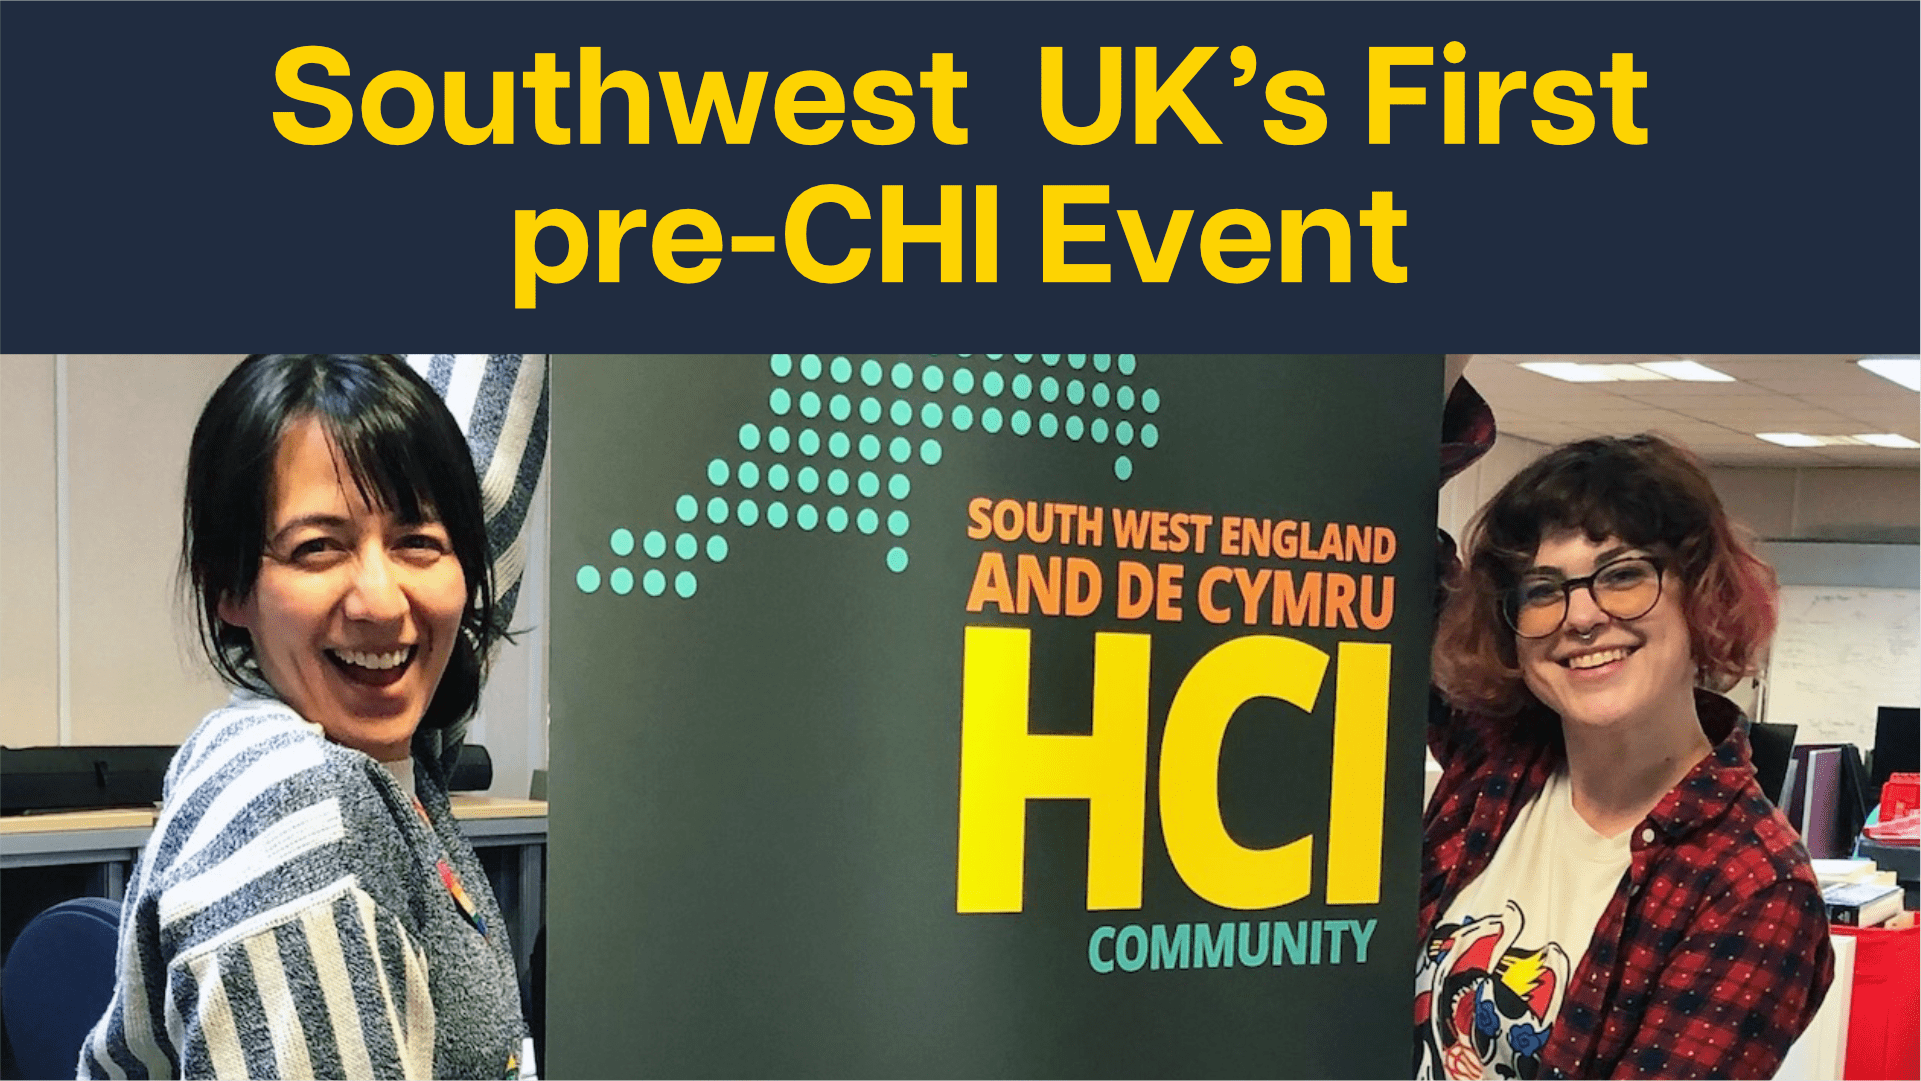 Photo of two people smiling and holding up a green banner with the phrase 'HCI'. Above it yellow text on navy background reads 'Southwest UK's First pre-CHI Event'